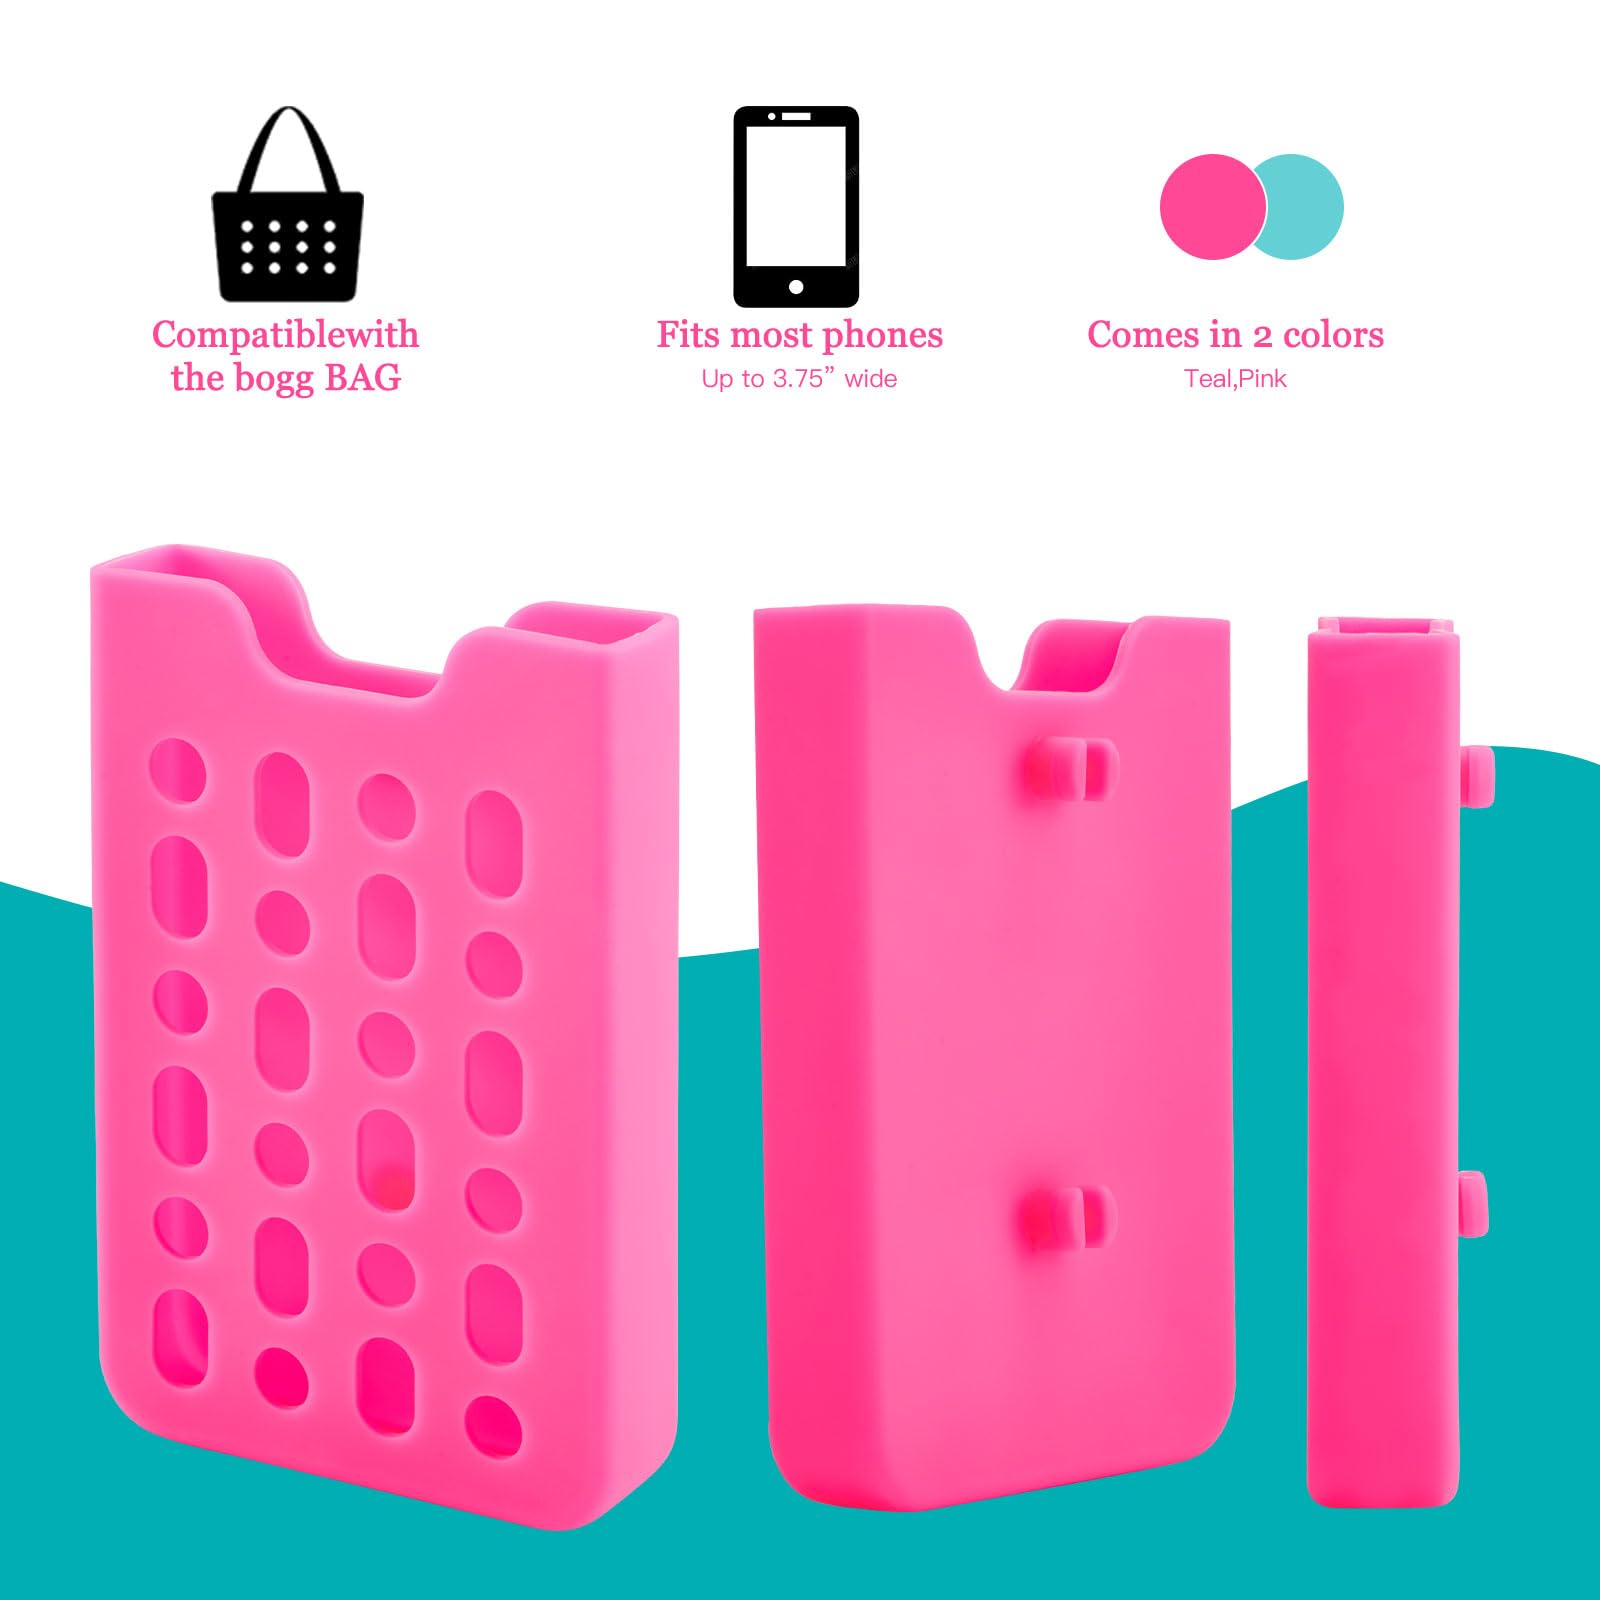 Phone Holder Charm Accessory Compatible with Bogg Bags, Silicone Cell Phone Holder for Rubber Beach Tote Bag Accessories, Keep Your Phone Handy with Your Tote Bag.